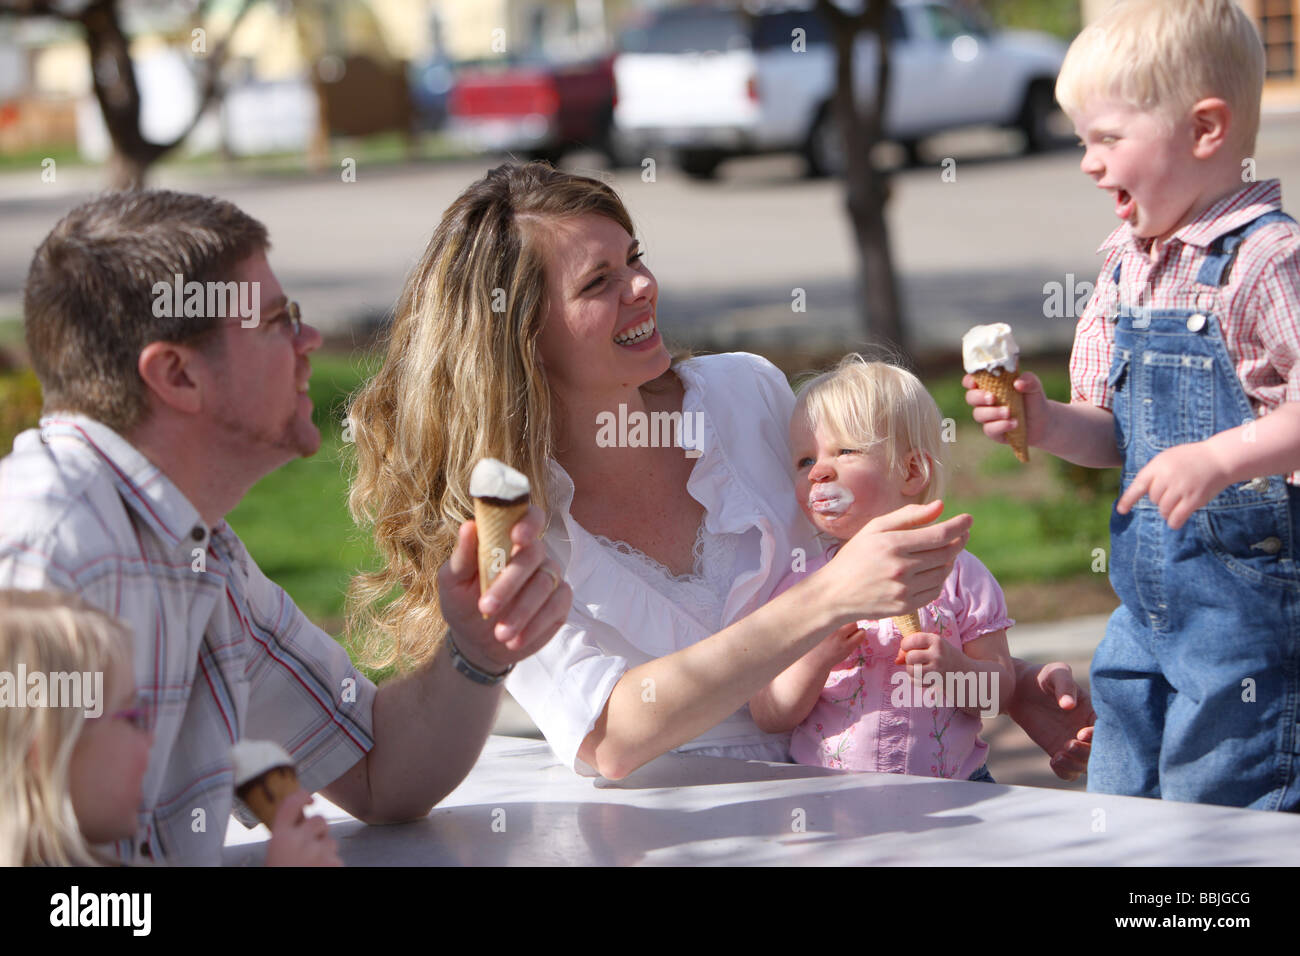 Family having ice cream cones together at park Stock Photo